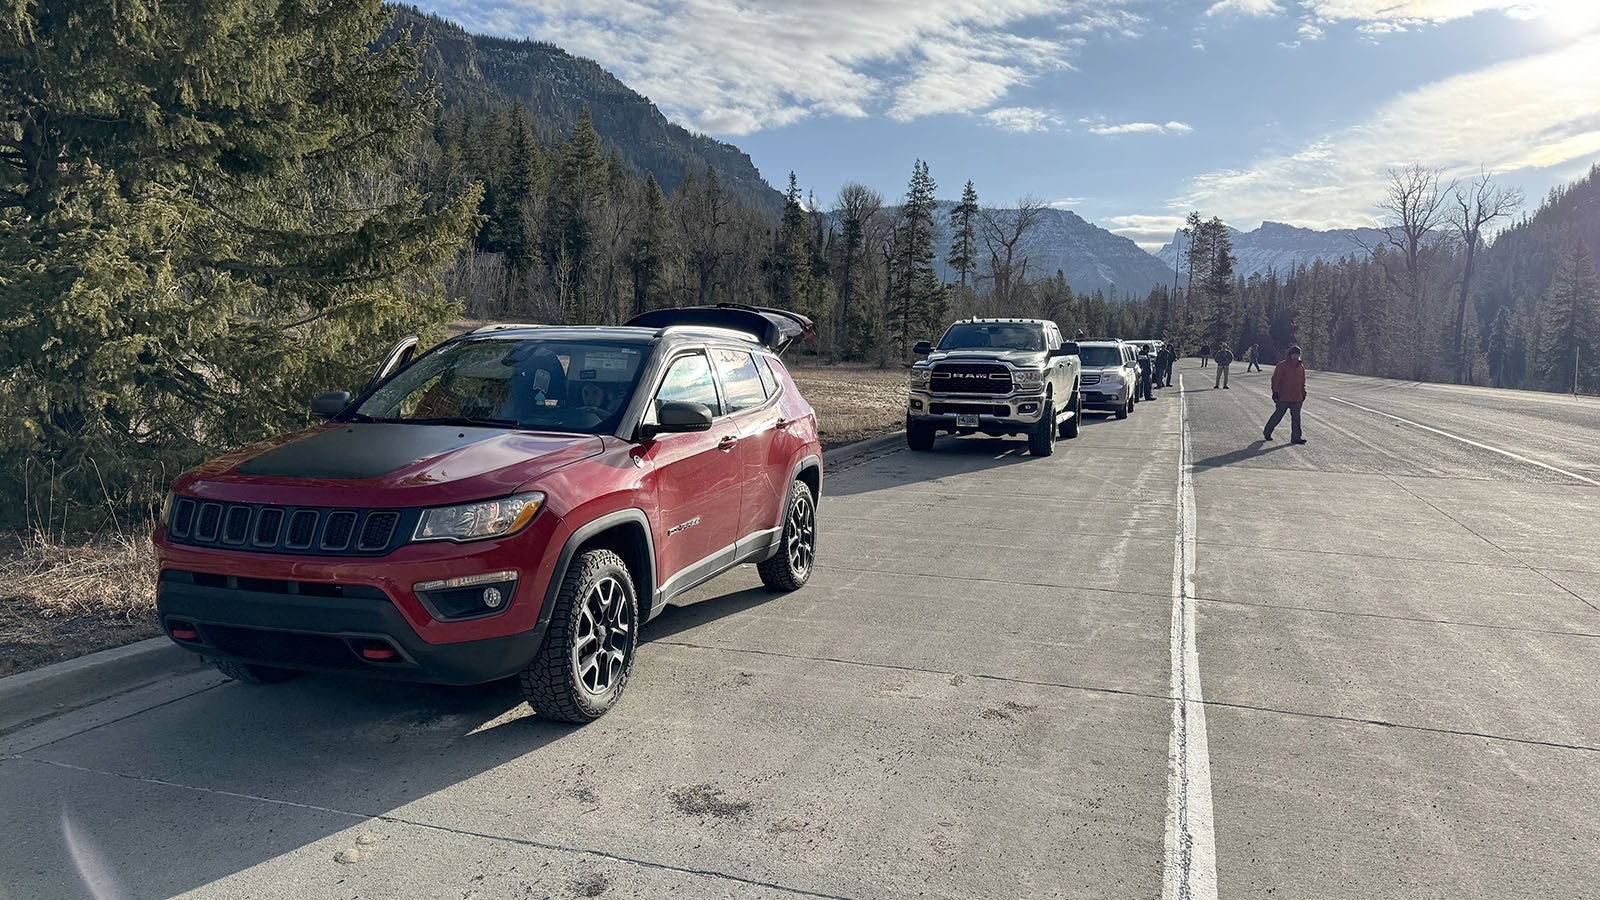 Stacy Boisseau's Jeep Compass at the front of the line to enter Yellowstone through the East Entrance of Yellowstone on Friday morning.